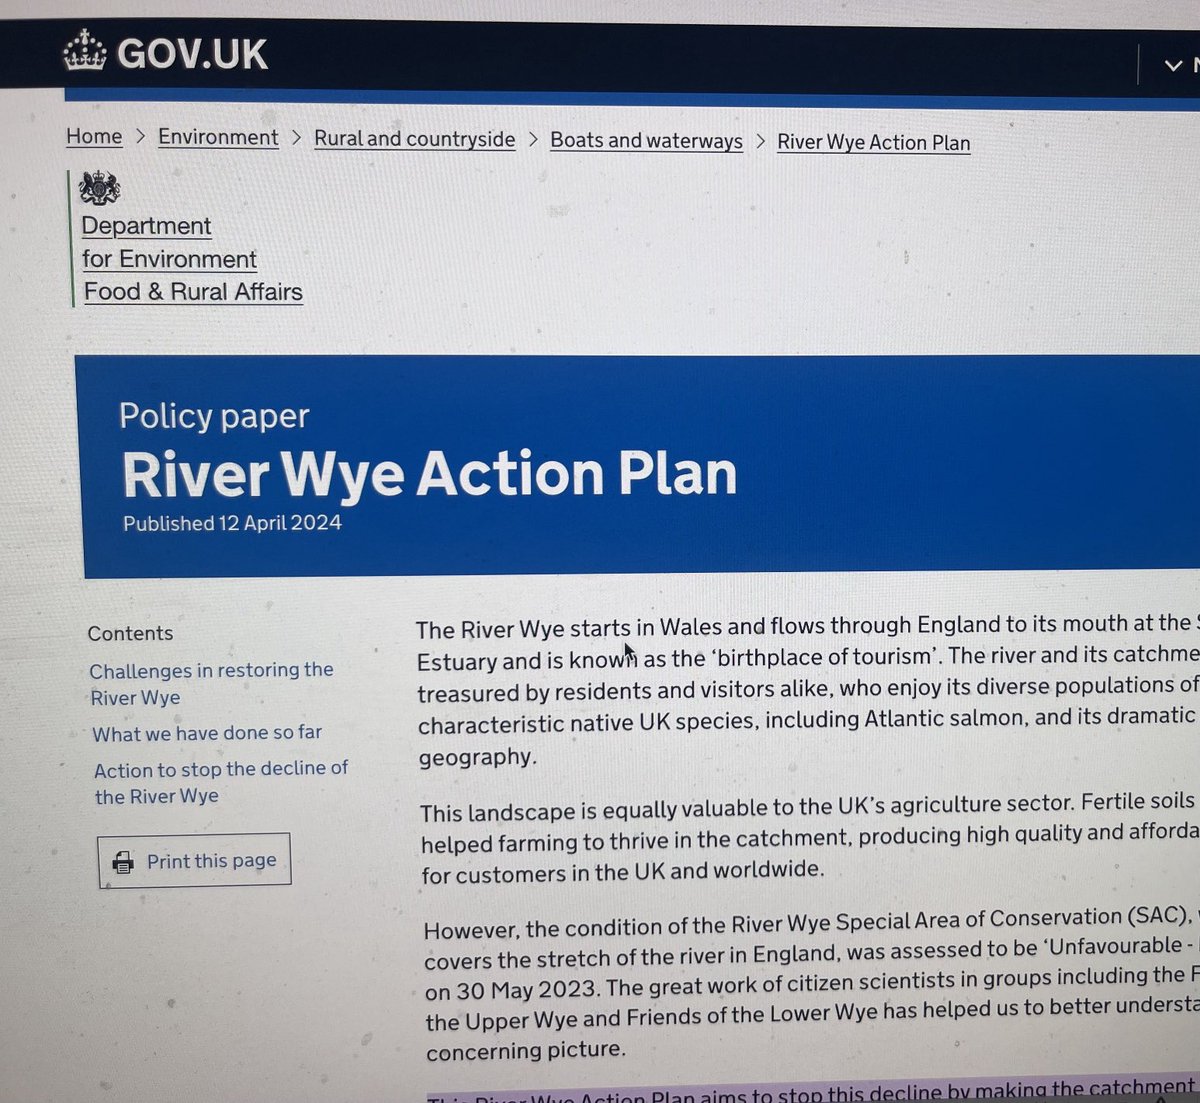 So the long overdue Wye Plan is out Finally full acknowledgment of the role intensive agri has played in trashing the river But one of the main recommendations of the plan is to…create a plan And many actions are vague or “subject to consultation” I fear we have been here before